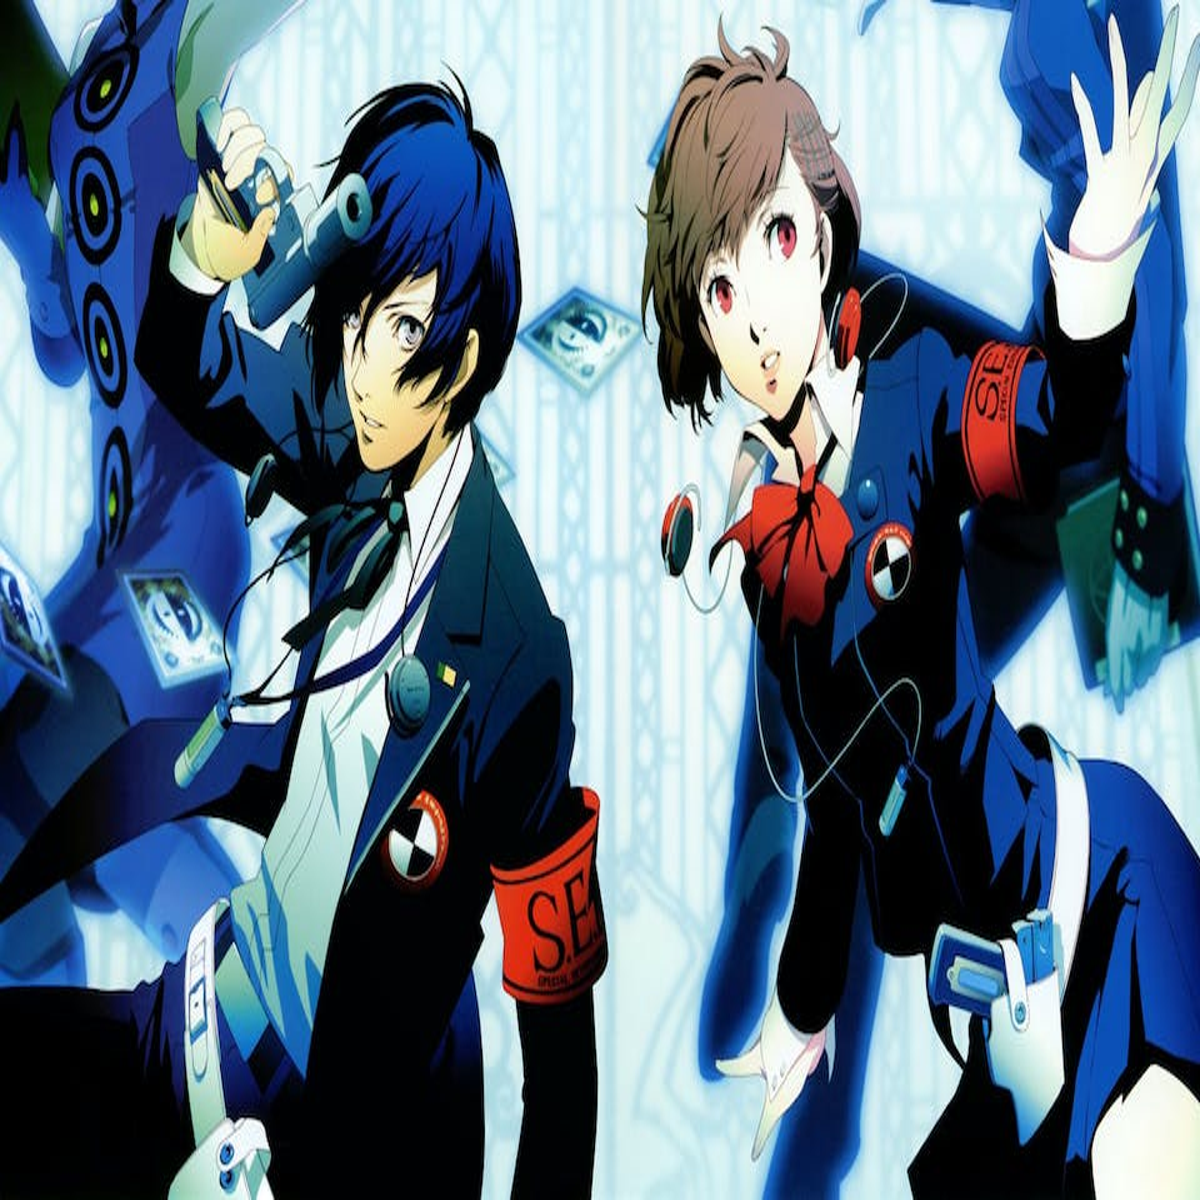 Persona 3 Reload Confirmed For Game Pass As Day-One 